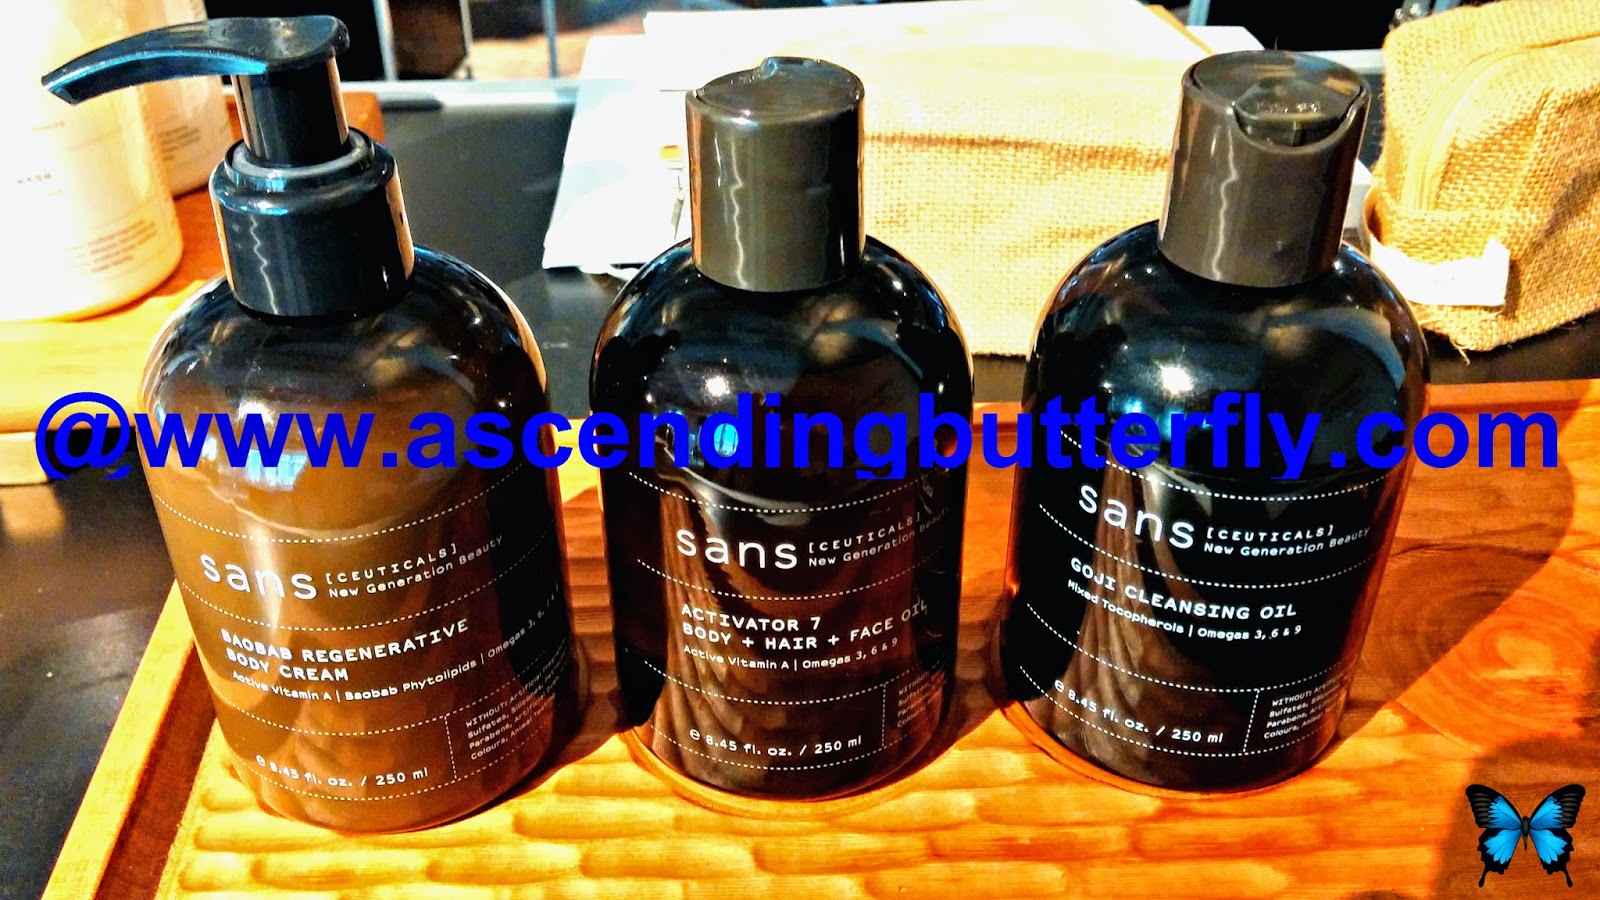 sans[ceuticals] - New Generation Beauty presented their products for skin and hair at Elements Showcase New York City, February 2014